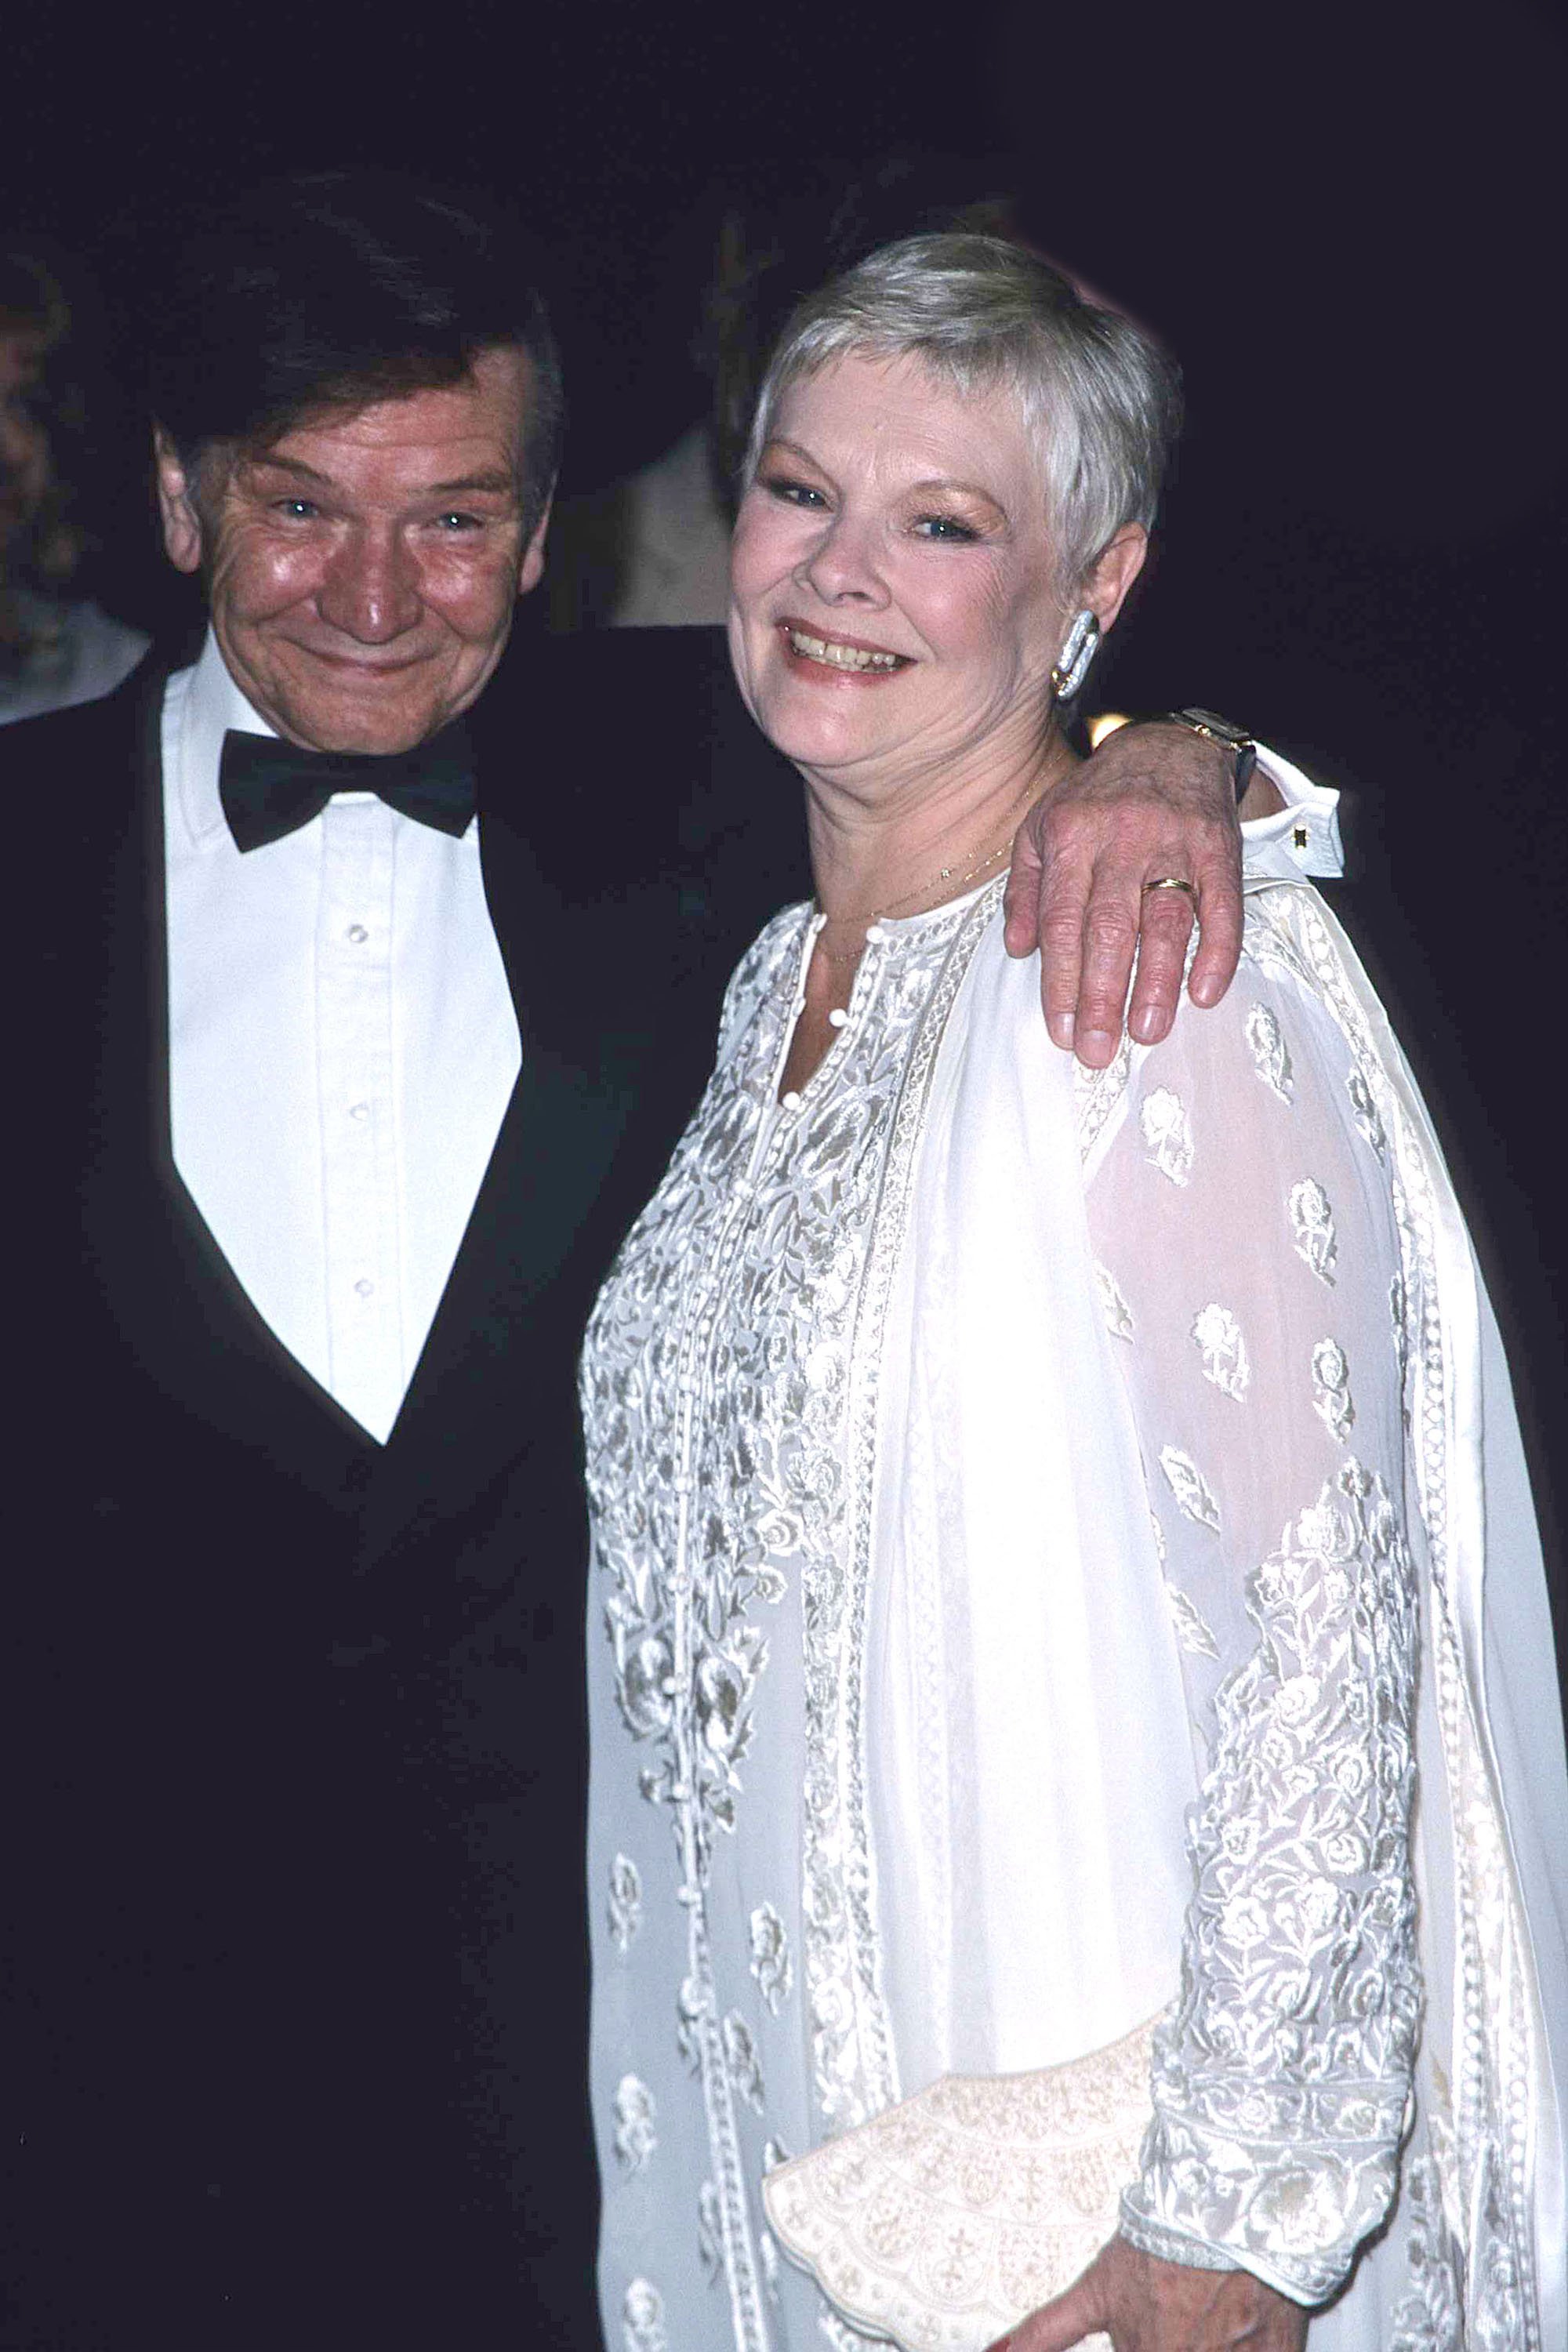 Judi Dench and her husband actor Michael Williams during "James Bond, The World in not Enough" premiere at Odeon Leicestere Square in London, Great Britain ┃Source: Getty Images